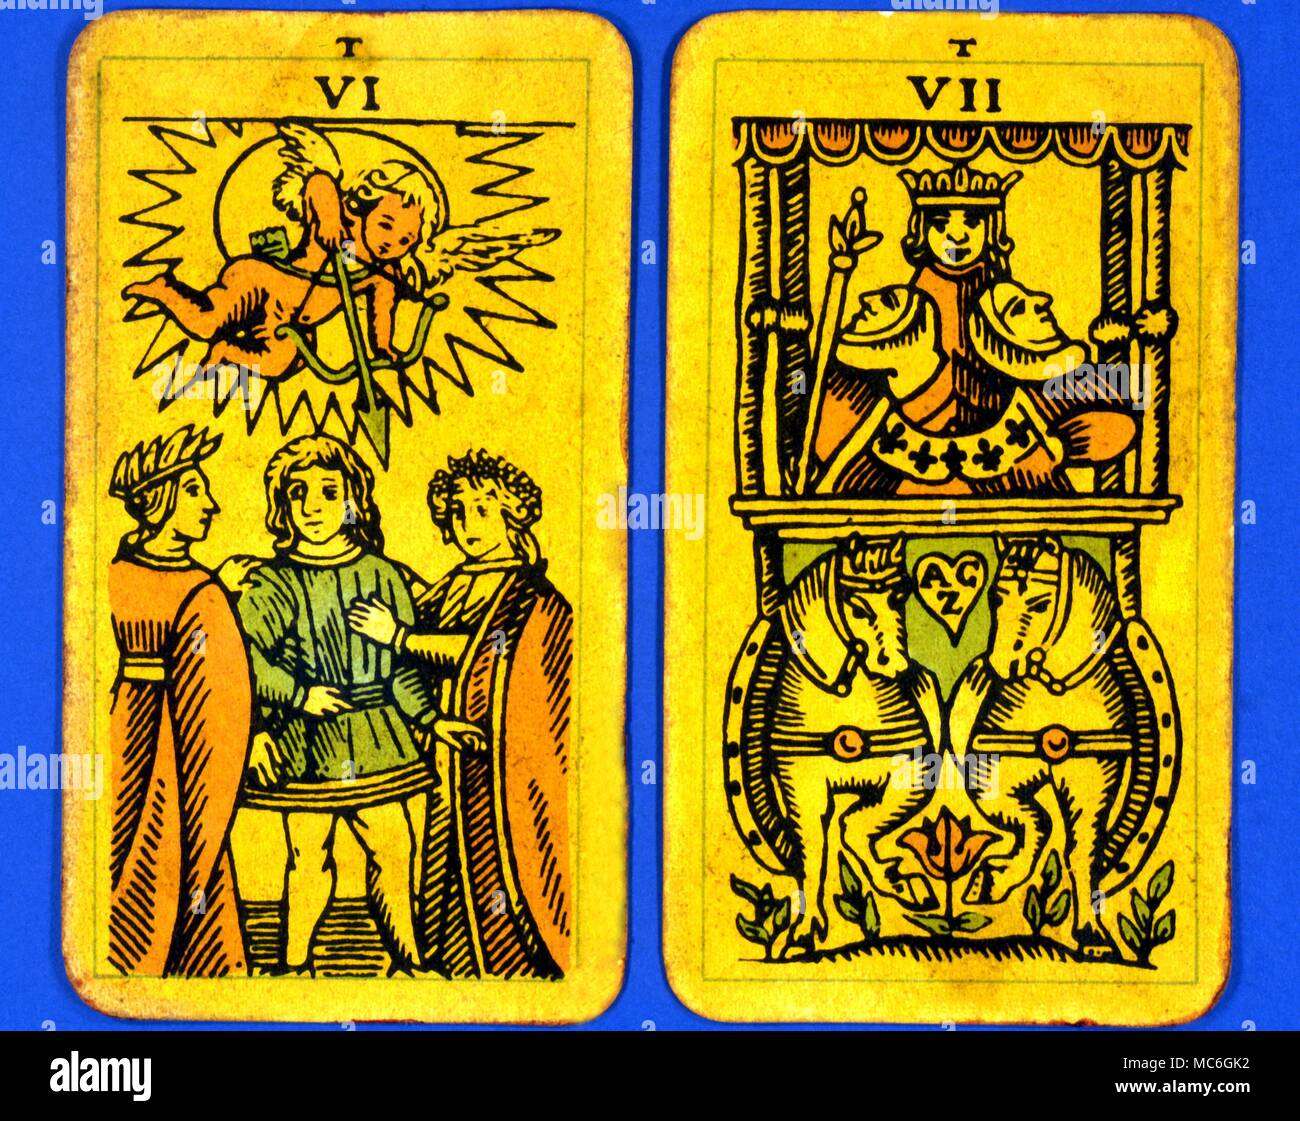 Tarot Cards-Majo Arcana- The Parisian Tarot. Card 6. The Lovers and Card 7. The Chariot. Two cards from a Major Arcana picture Tarot, probably designed in an archaizing style in loose imitation of the Rosicrucian deck designed by Pamela Coleman Smith, alongside A.E.Waite, and various earlier decks, such as that published by Encausse (Papus) in The Tarot of the Bohemians at the end of the 19th century, post 1905, but earlier than 1912. The name Parisian Tarot was given by the owner of the deck - it might however be called the Tau Tarot, from the intriguing letter Tau at the head of each card. Stock Photo